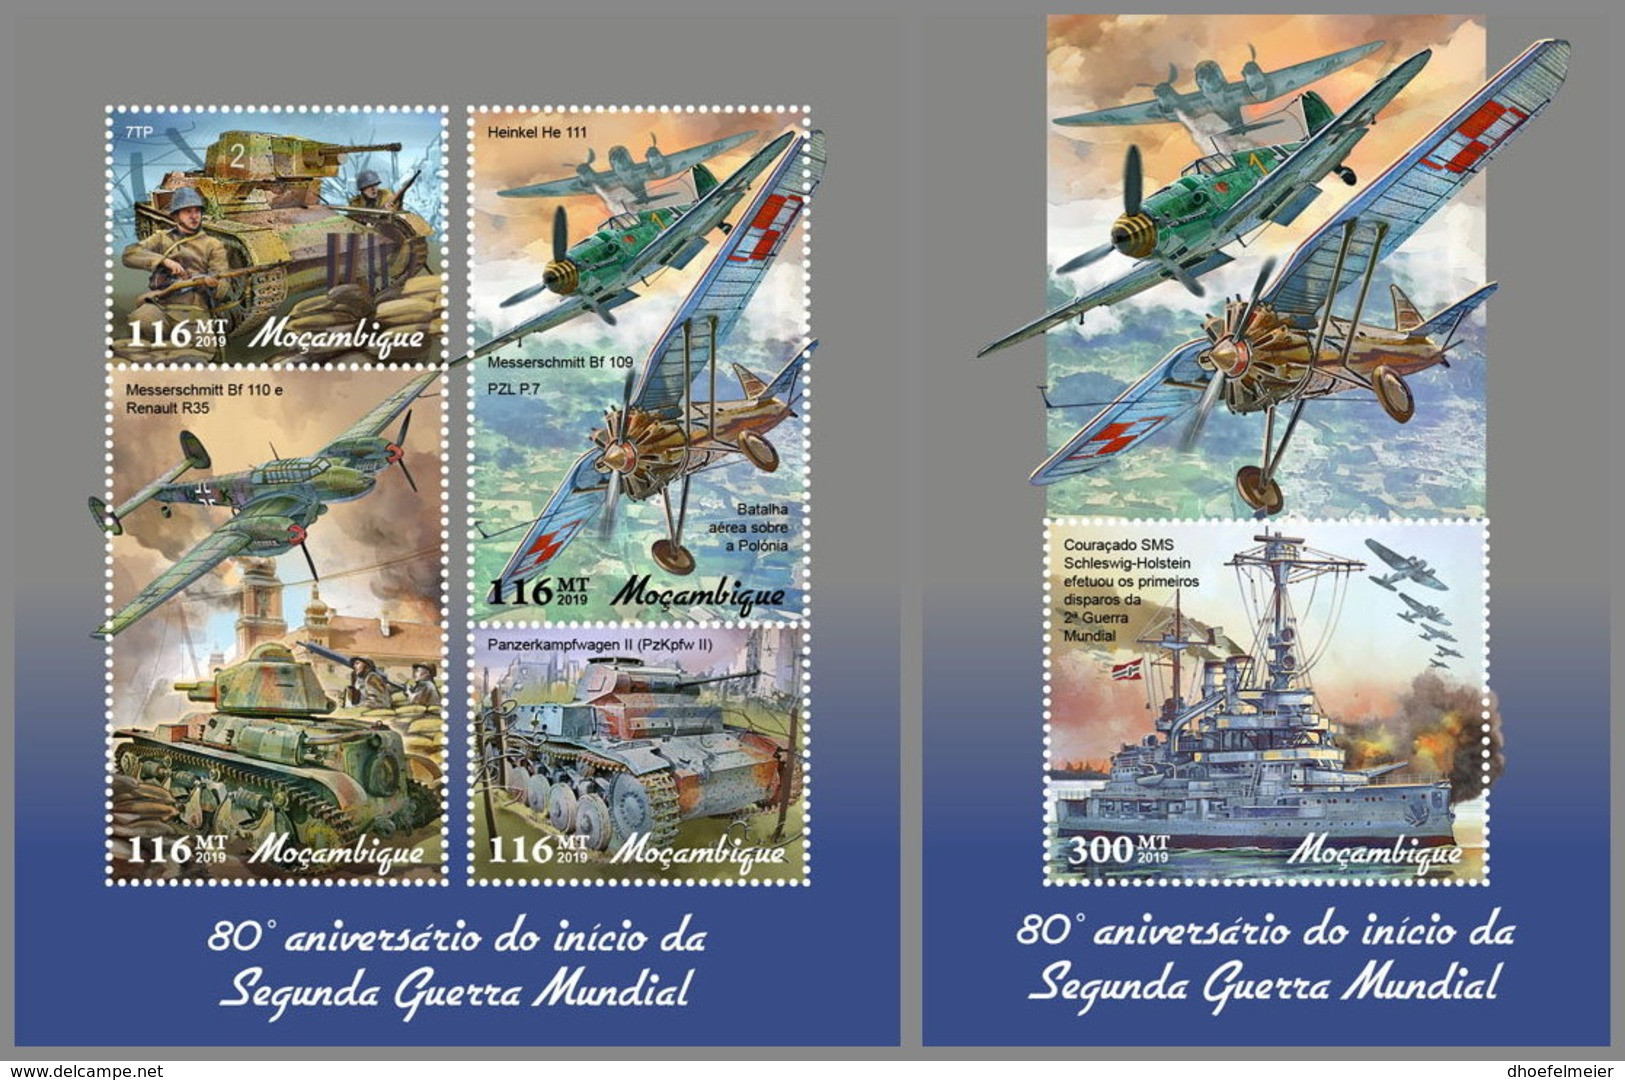 MOZAMBIQUE 2019 MNH 80 Years Beginning World War II 2. Weltkrieg M/S+S/S - OFFICIAL ISSUE - DH1909 - Guerre Mondiale (Seconde)